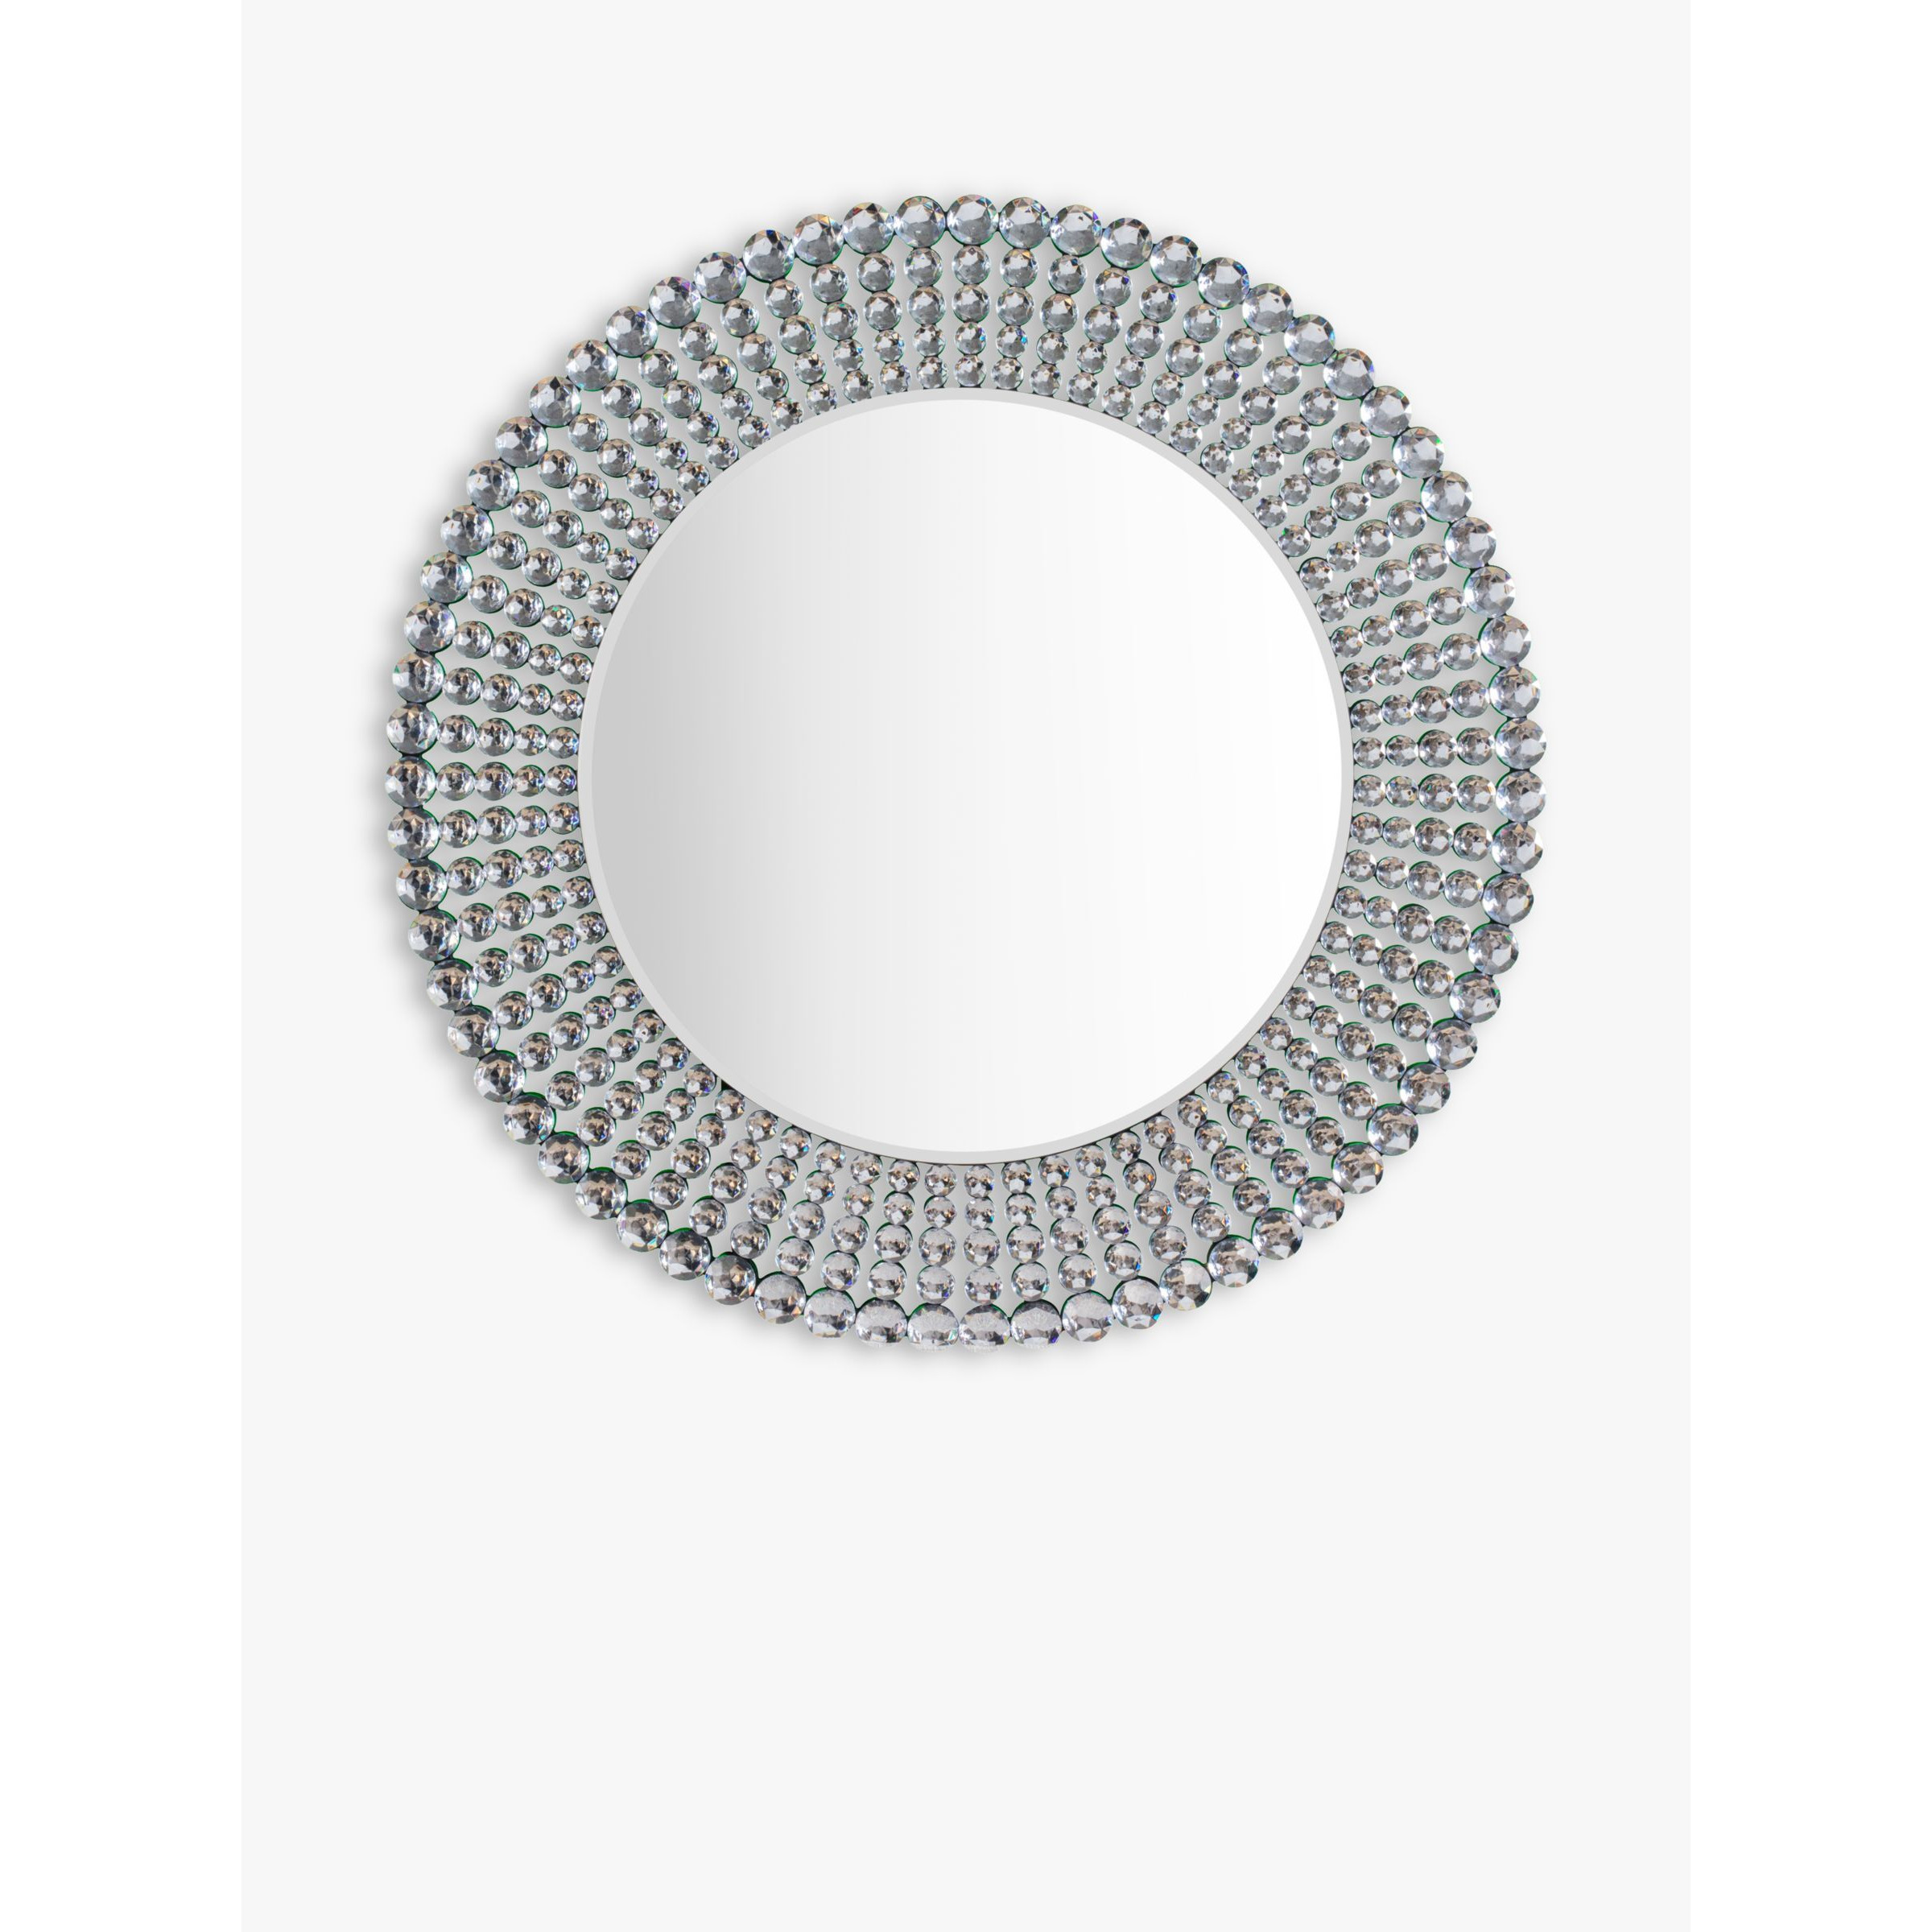 Gallery Direct Crystal Frame Decorative Round Wall Mirror, 90cm - image 1